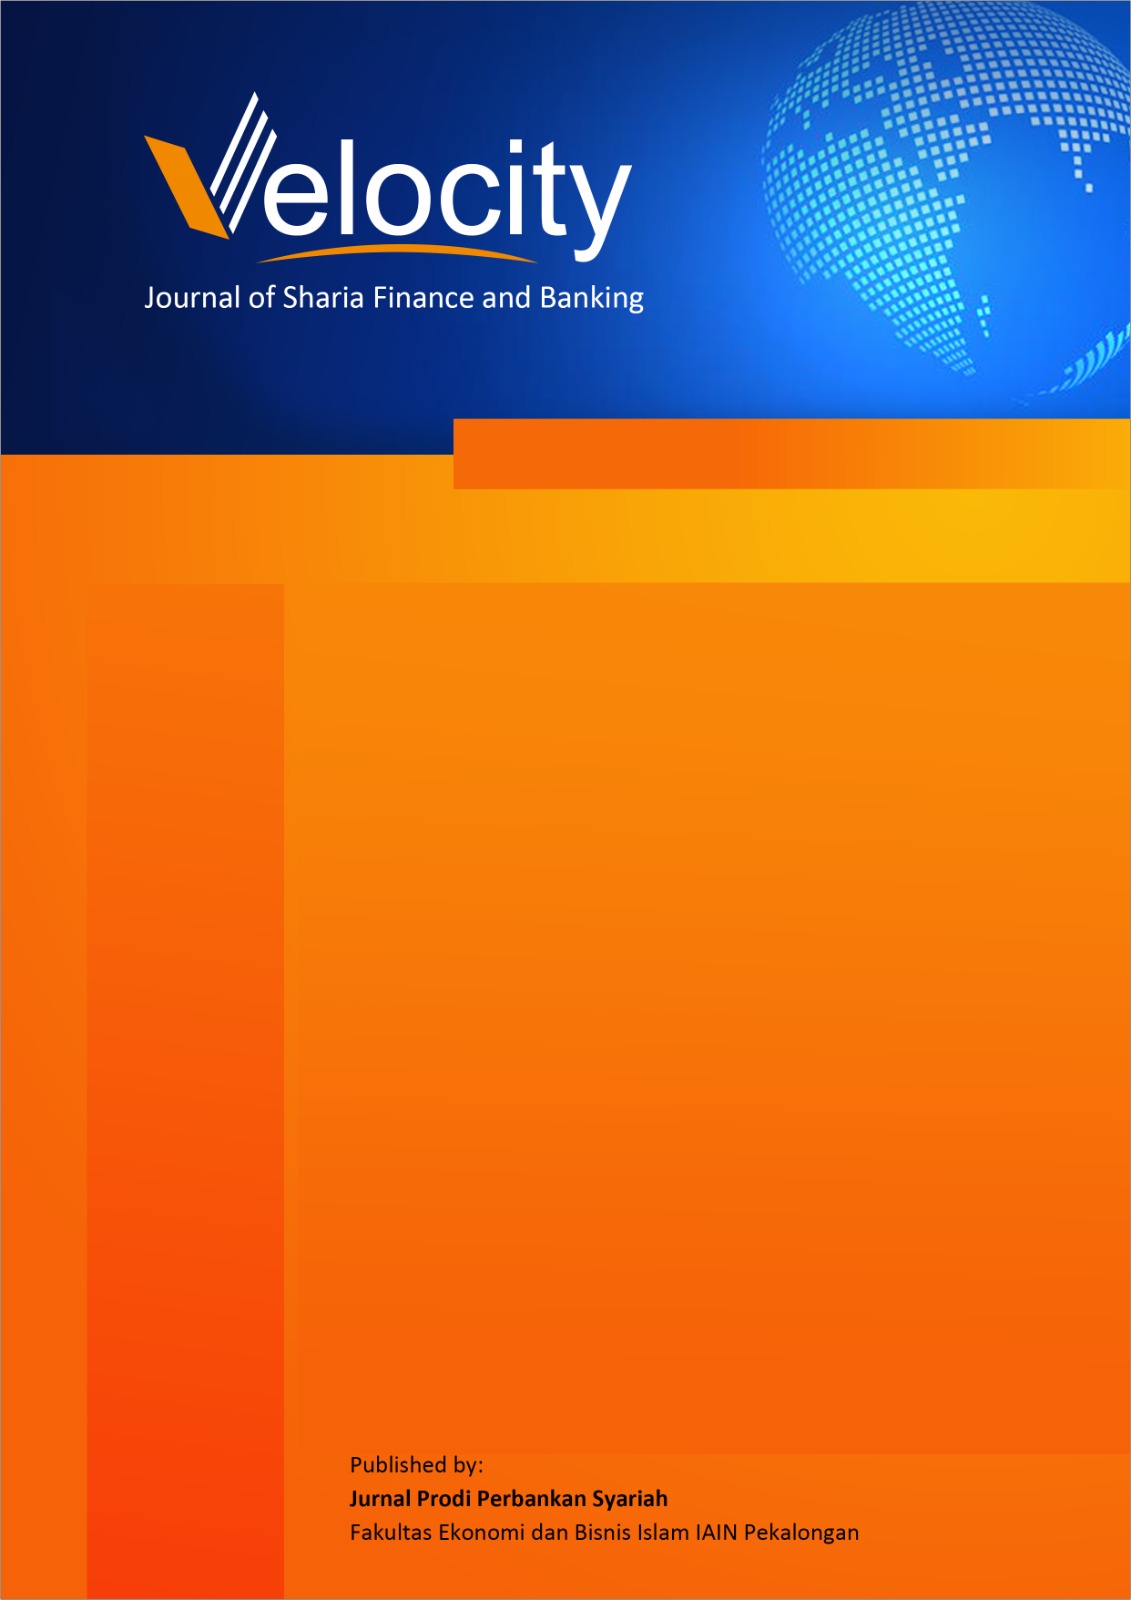 Velocity: Journal of Sharia Finance and Banking  is a journal that provides authoritative scientific information sources for researchers and academics in academia, research institutions, government agencies, and industry. ISSN Print is 2797-247X and Online is 2797-1546. We publish original research papers, review articles and case studies focused on Islamic Finance and Banking as well as related topics. All papers were peer reviewed by at least two reviewers. This journal is maintained and published by Department of Islamic Banking, Faculty of Islamic Economics and Business, Institut Agama Islam Negeri Pekalongan.